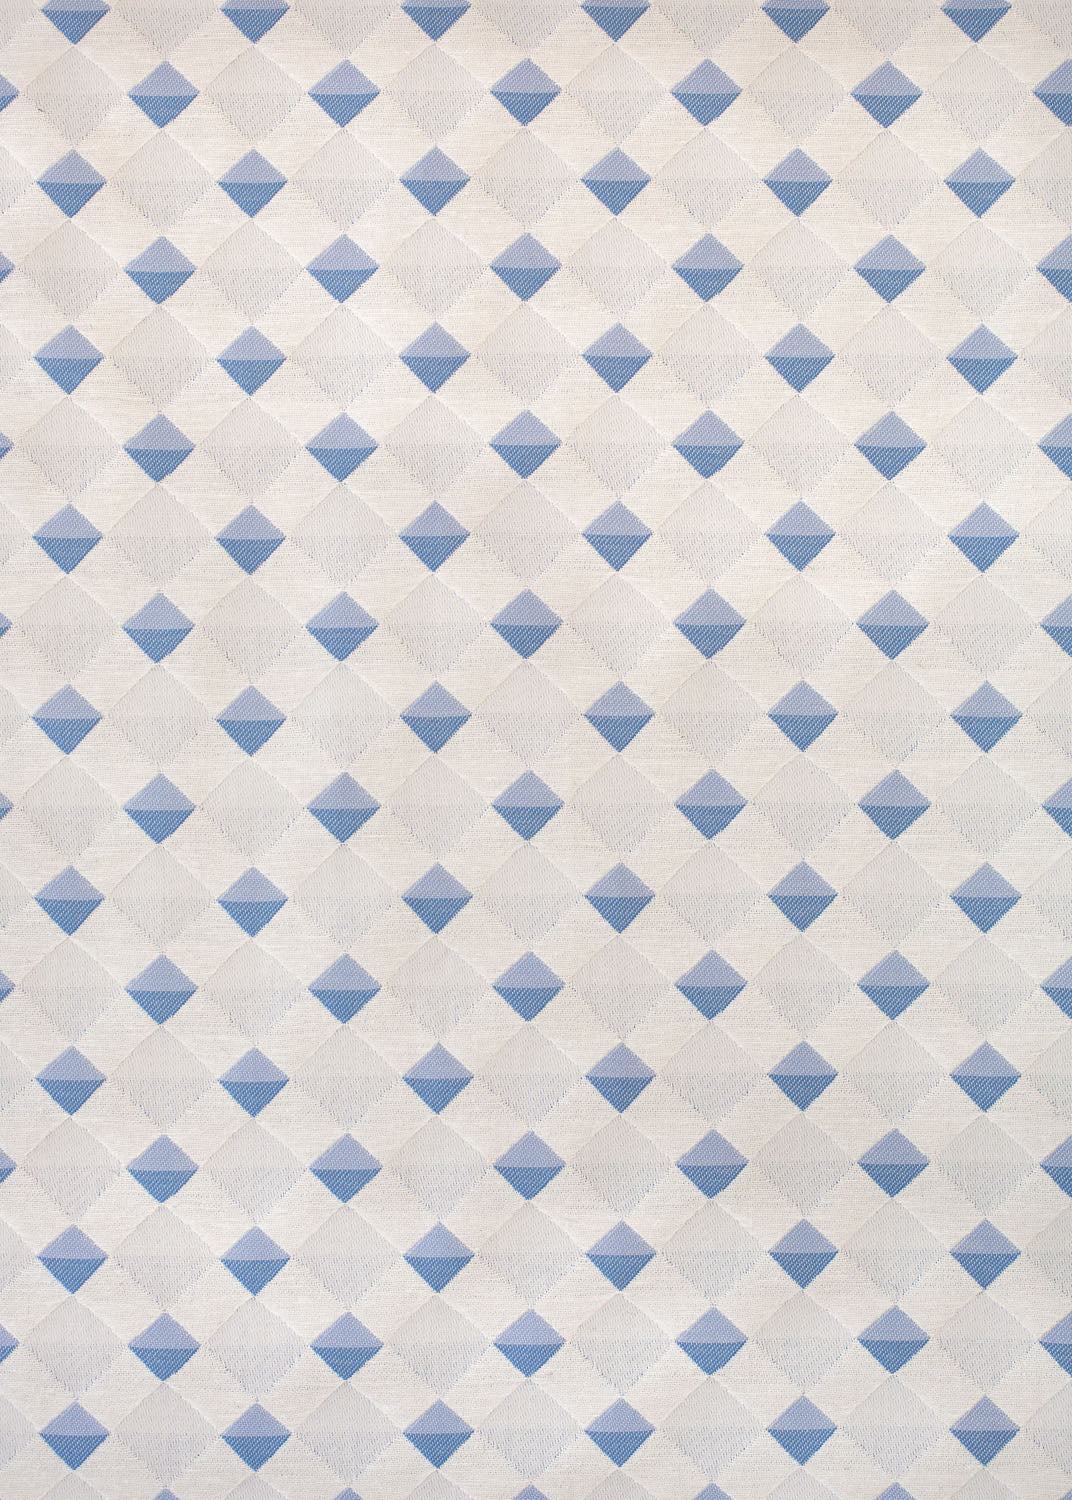 Detail of fabric in a textural diamond lattice print in blue on a cream field.